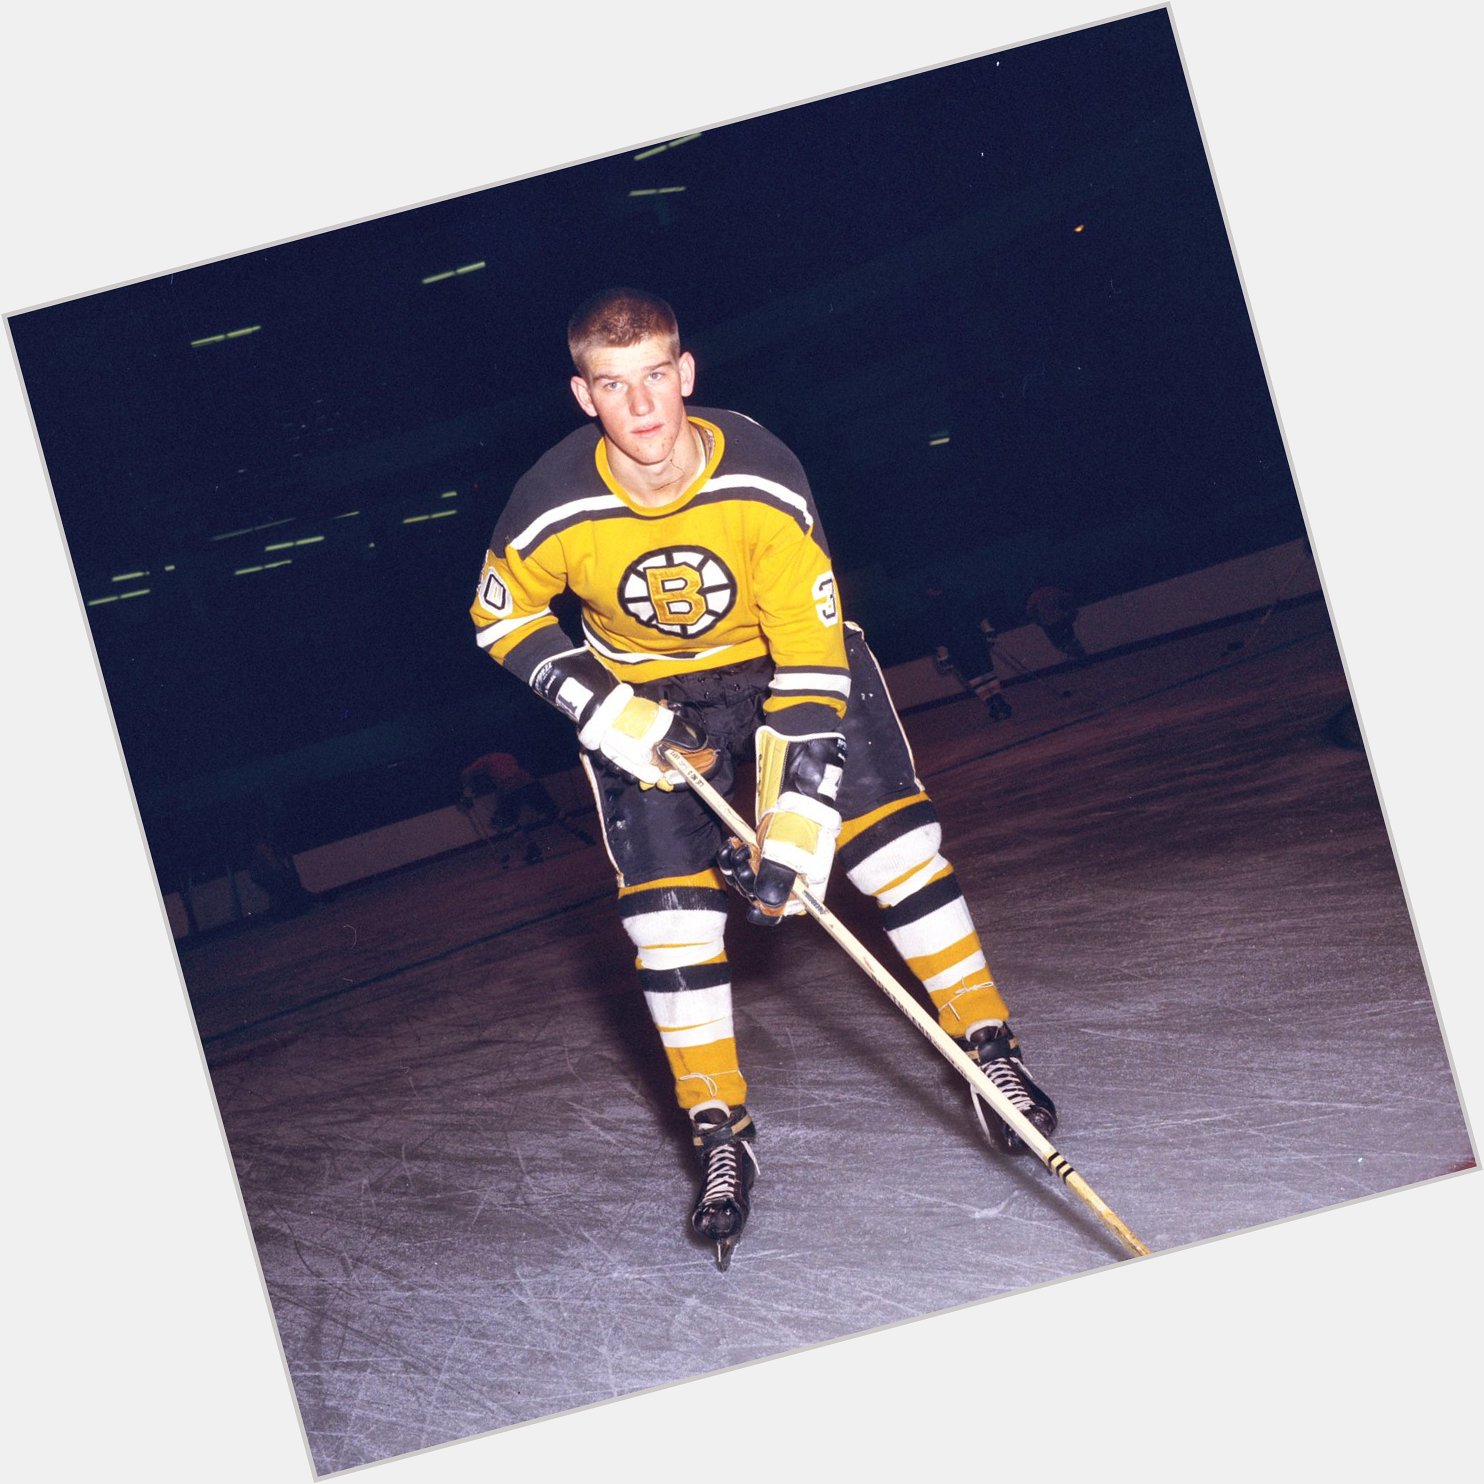 Happy Birthday goes out to Honoured Member Bobby Orr!  